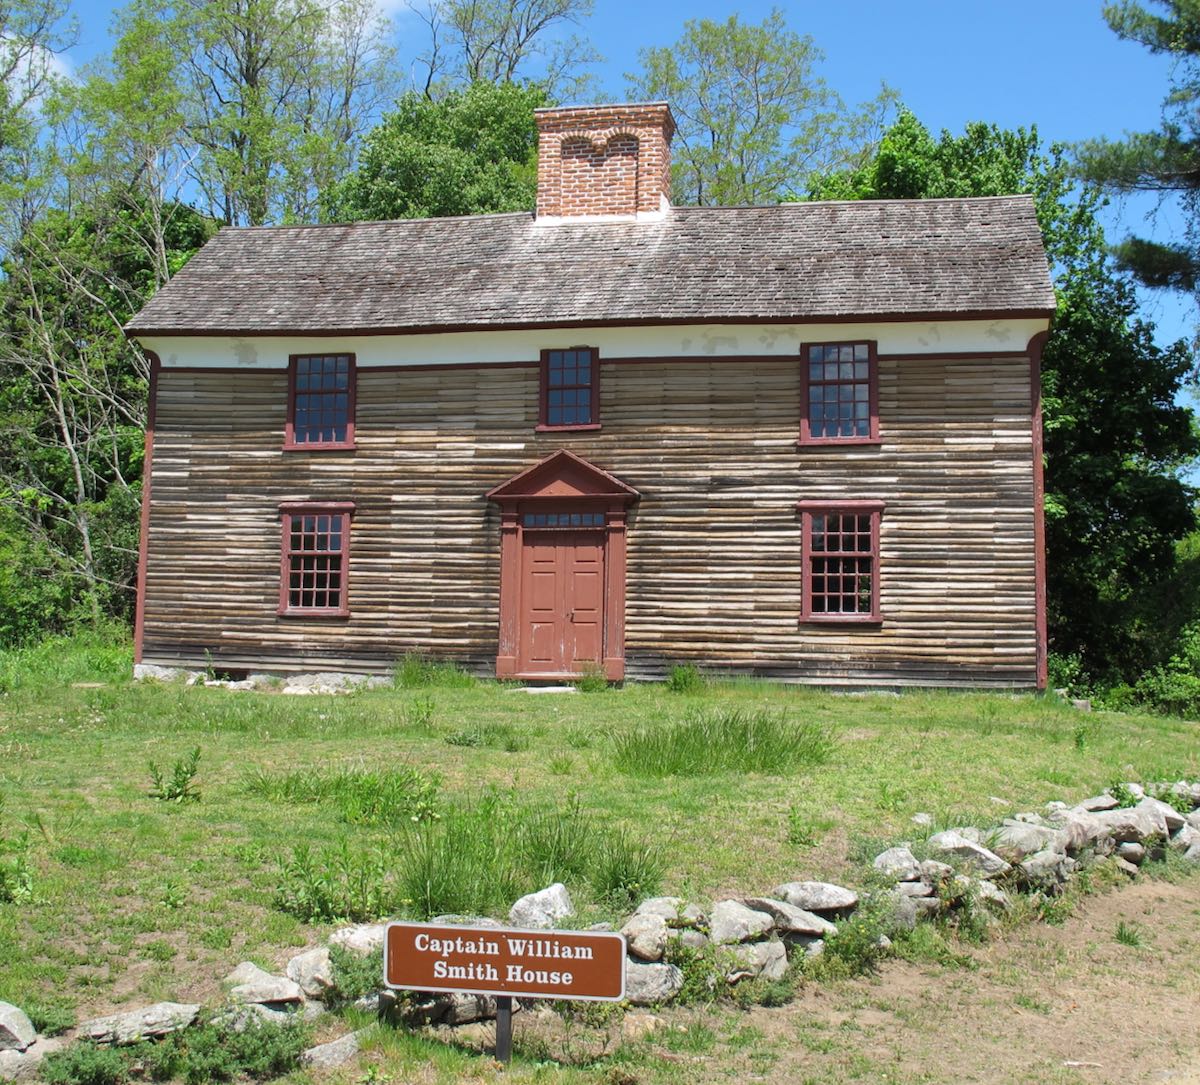 Captain William Smith House, Minute Man National Historical Park, Concord MA